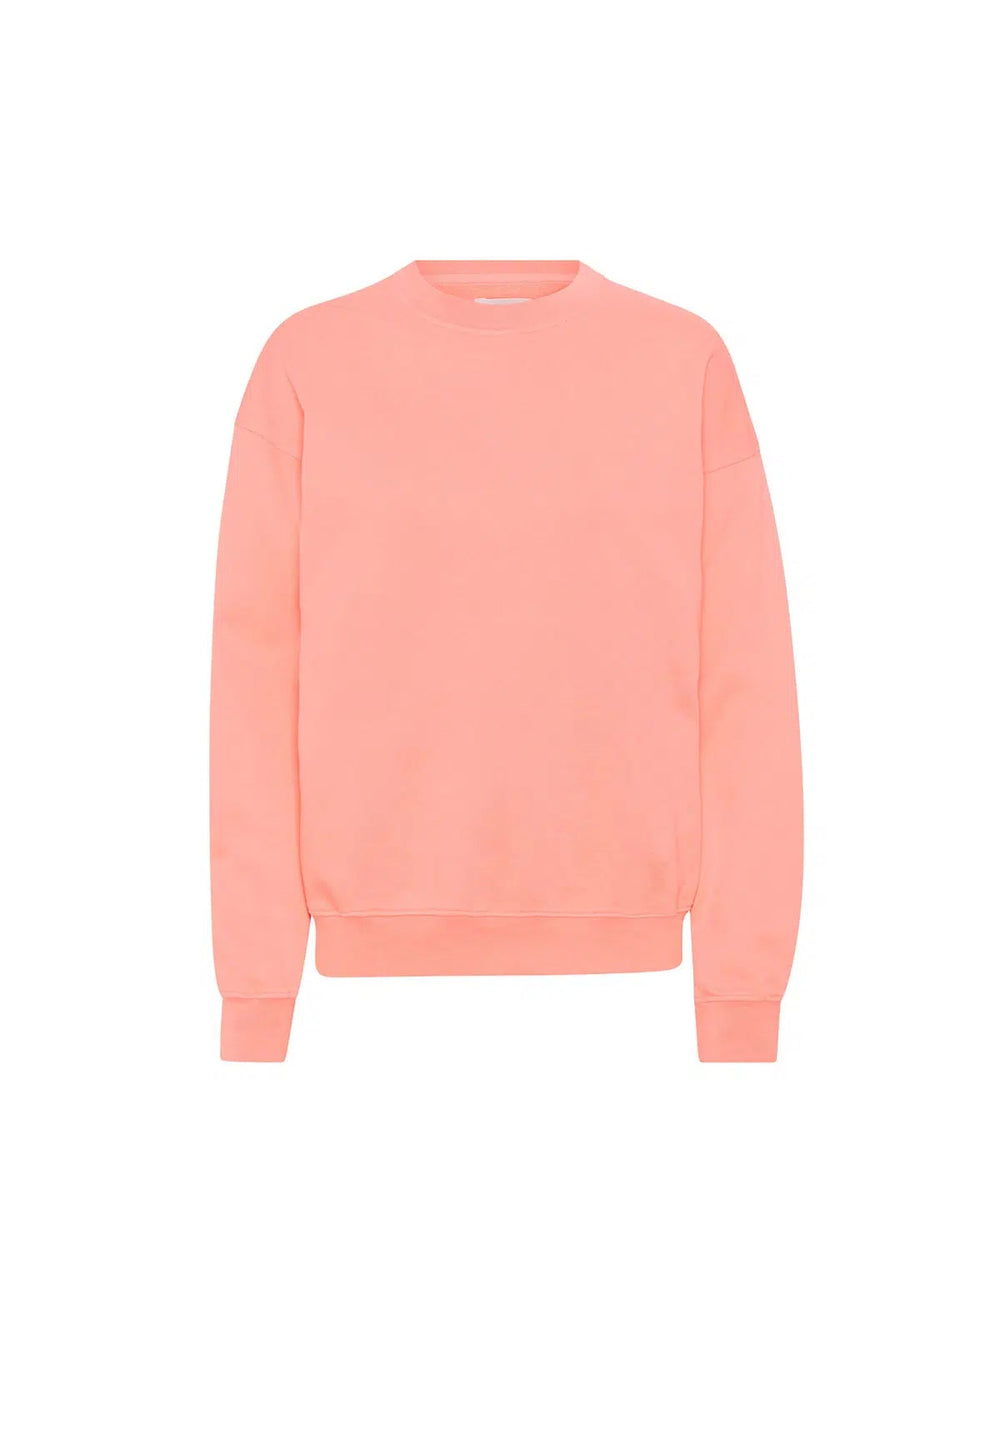 OVERSIZED CREW BRIGHT CORAL - Moeon